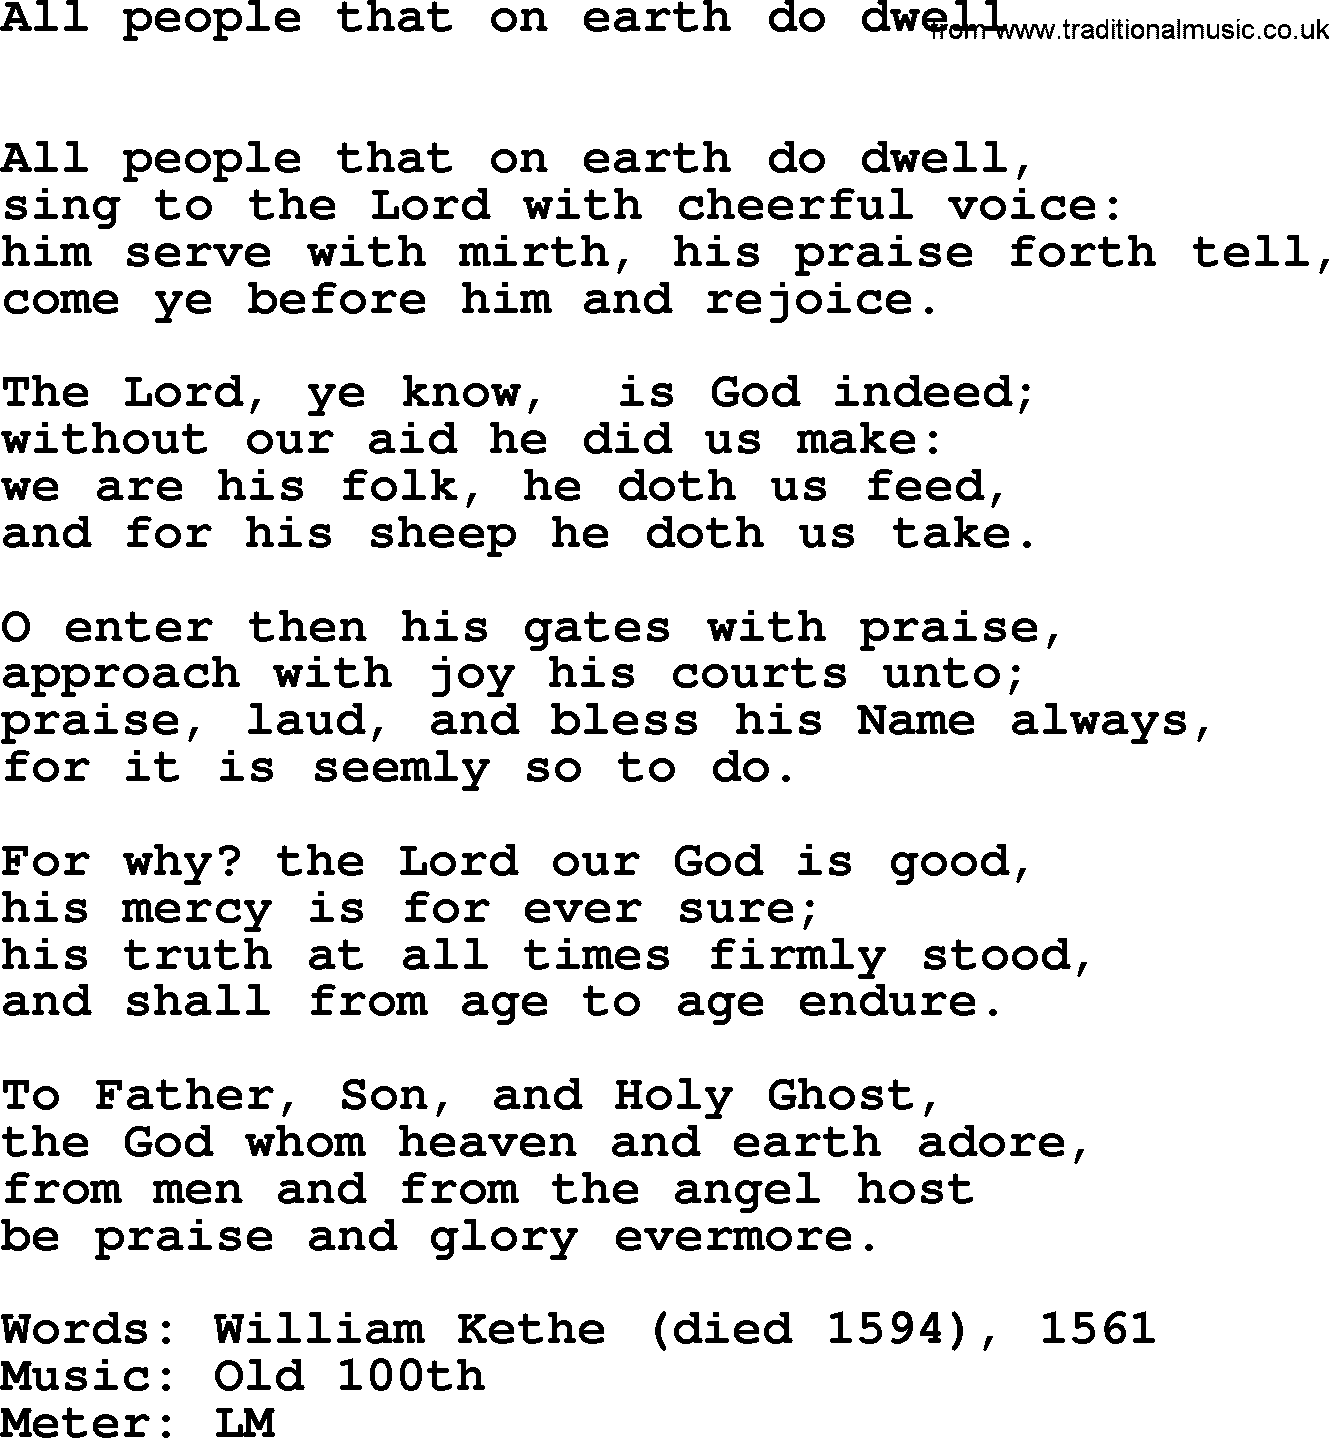 Book of Common Praise Hymn: All People That On Earth Do Dwell.txt lyrics with midi music